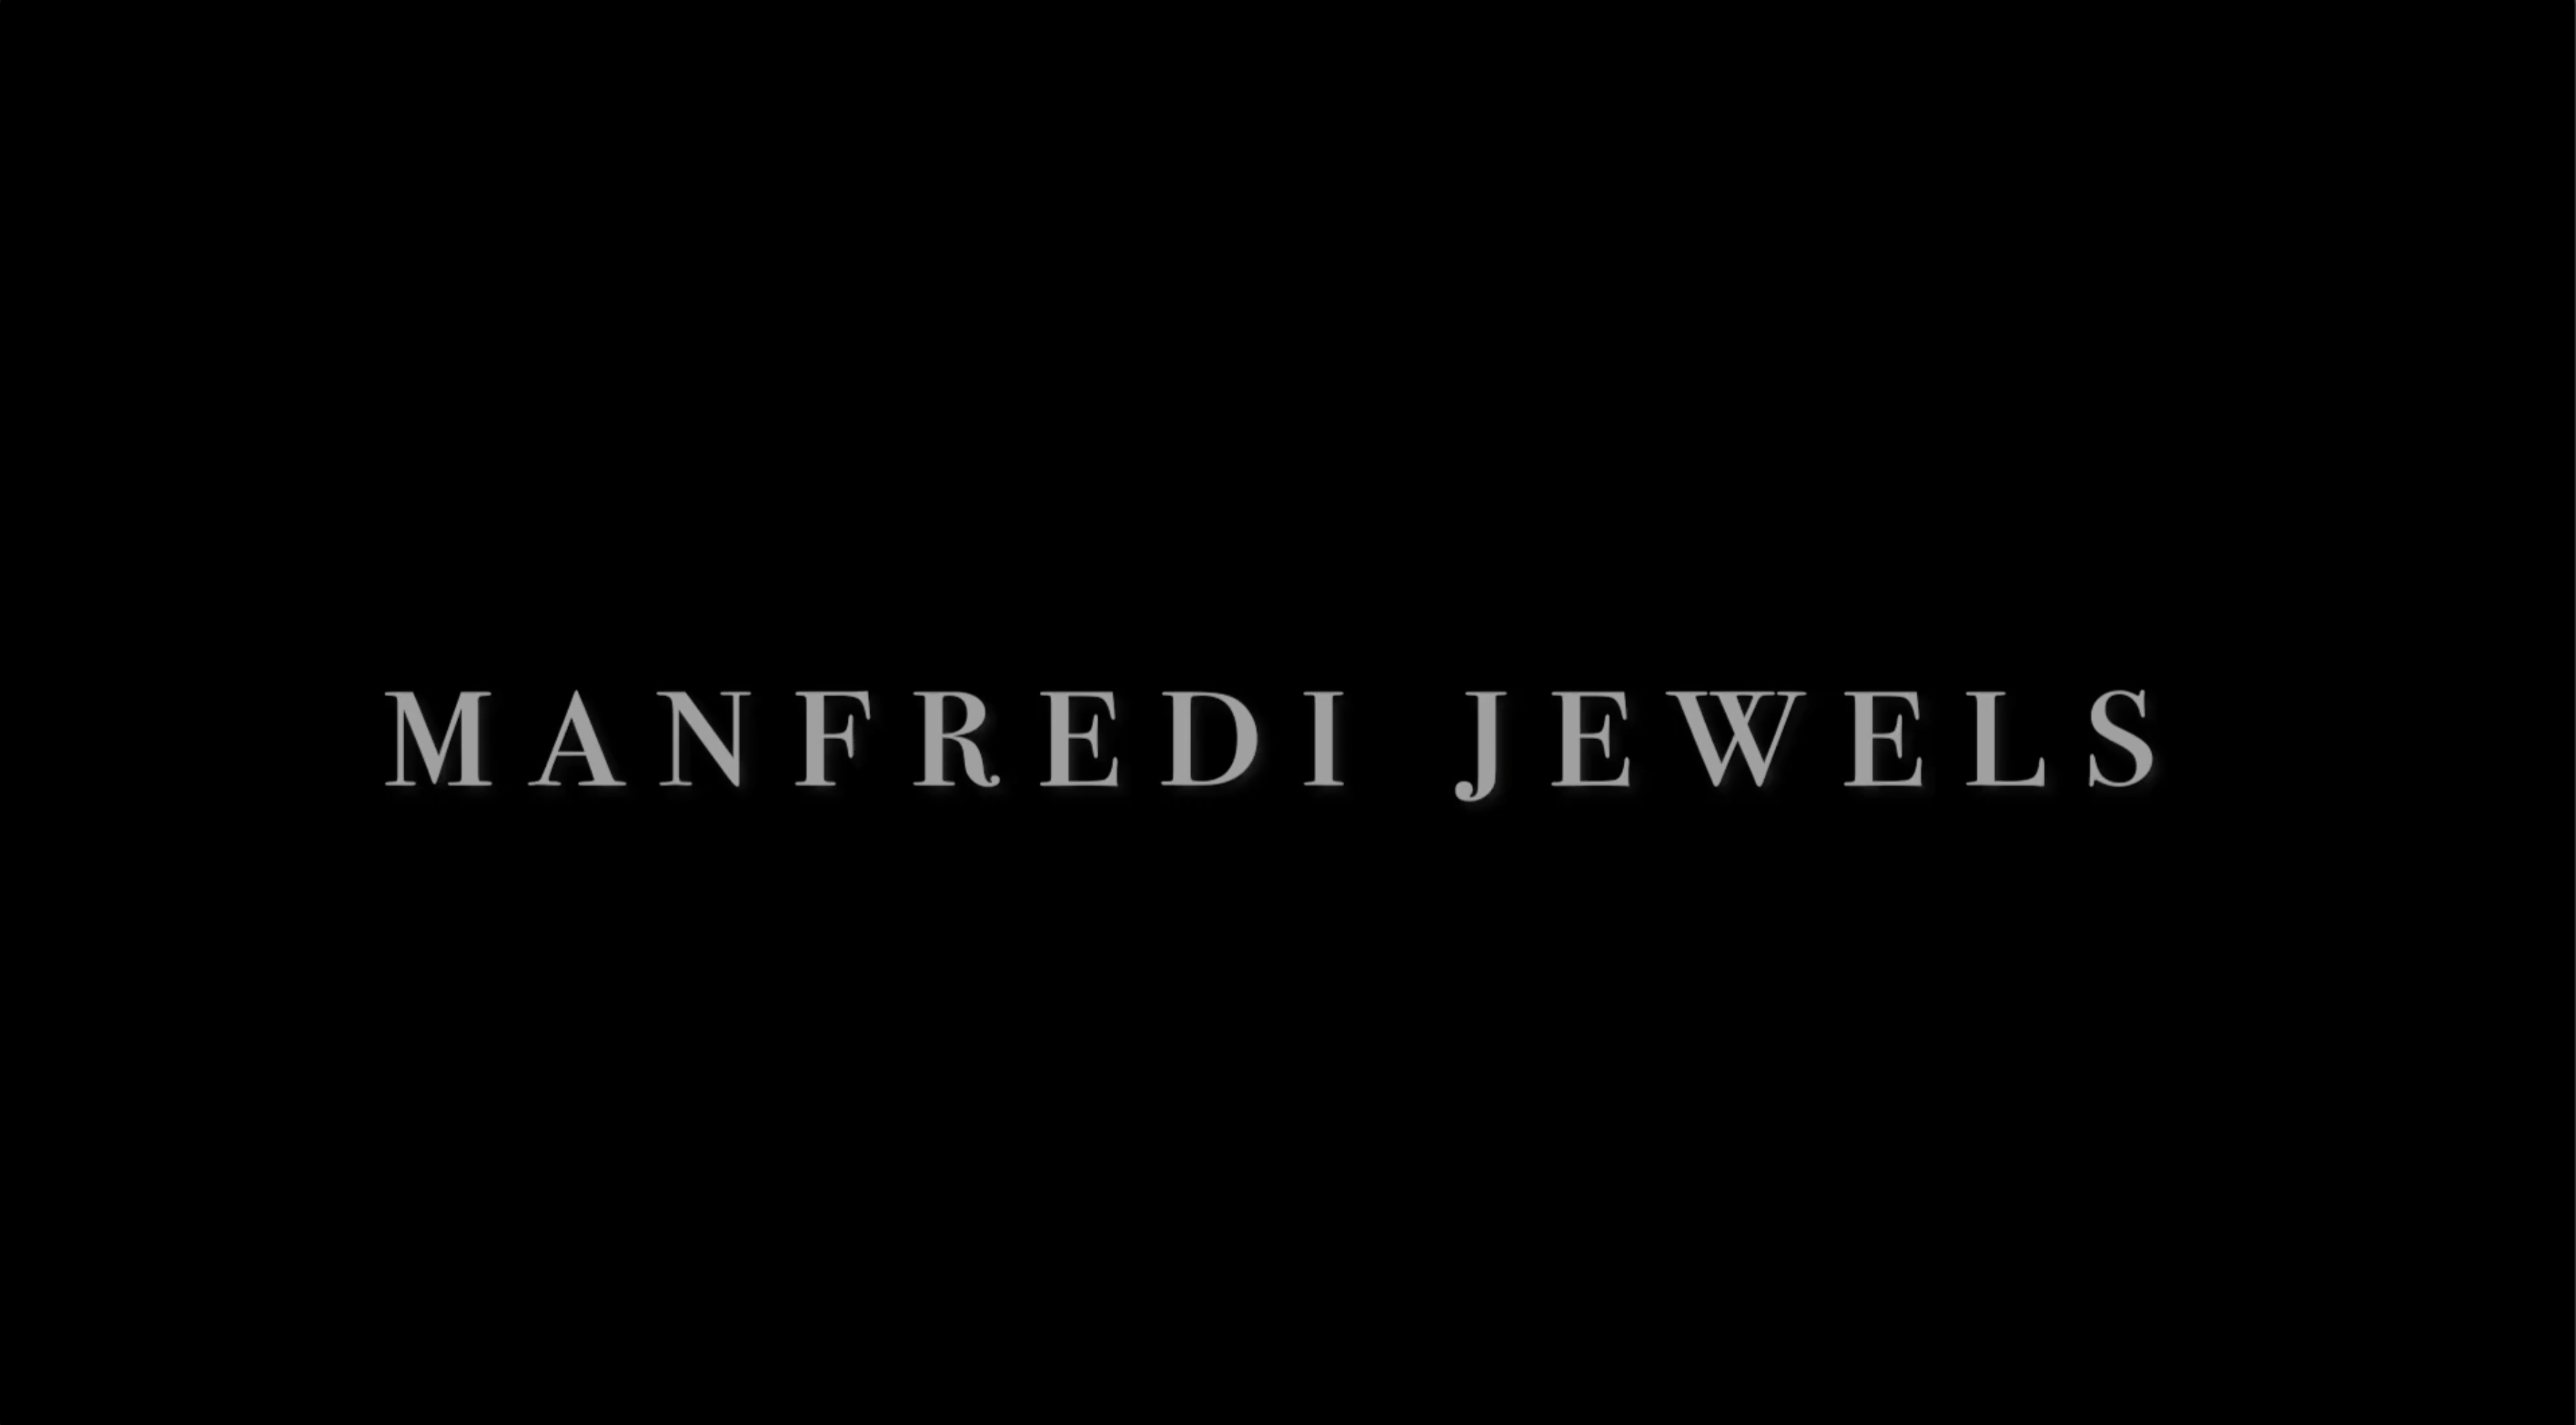 New Youtube Video! RARE Luxury Watches, Diamonds and Jewelry in Greenwich, Connecticut | Manfredi Jewels